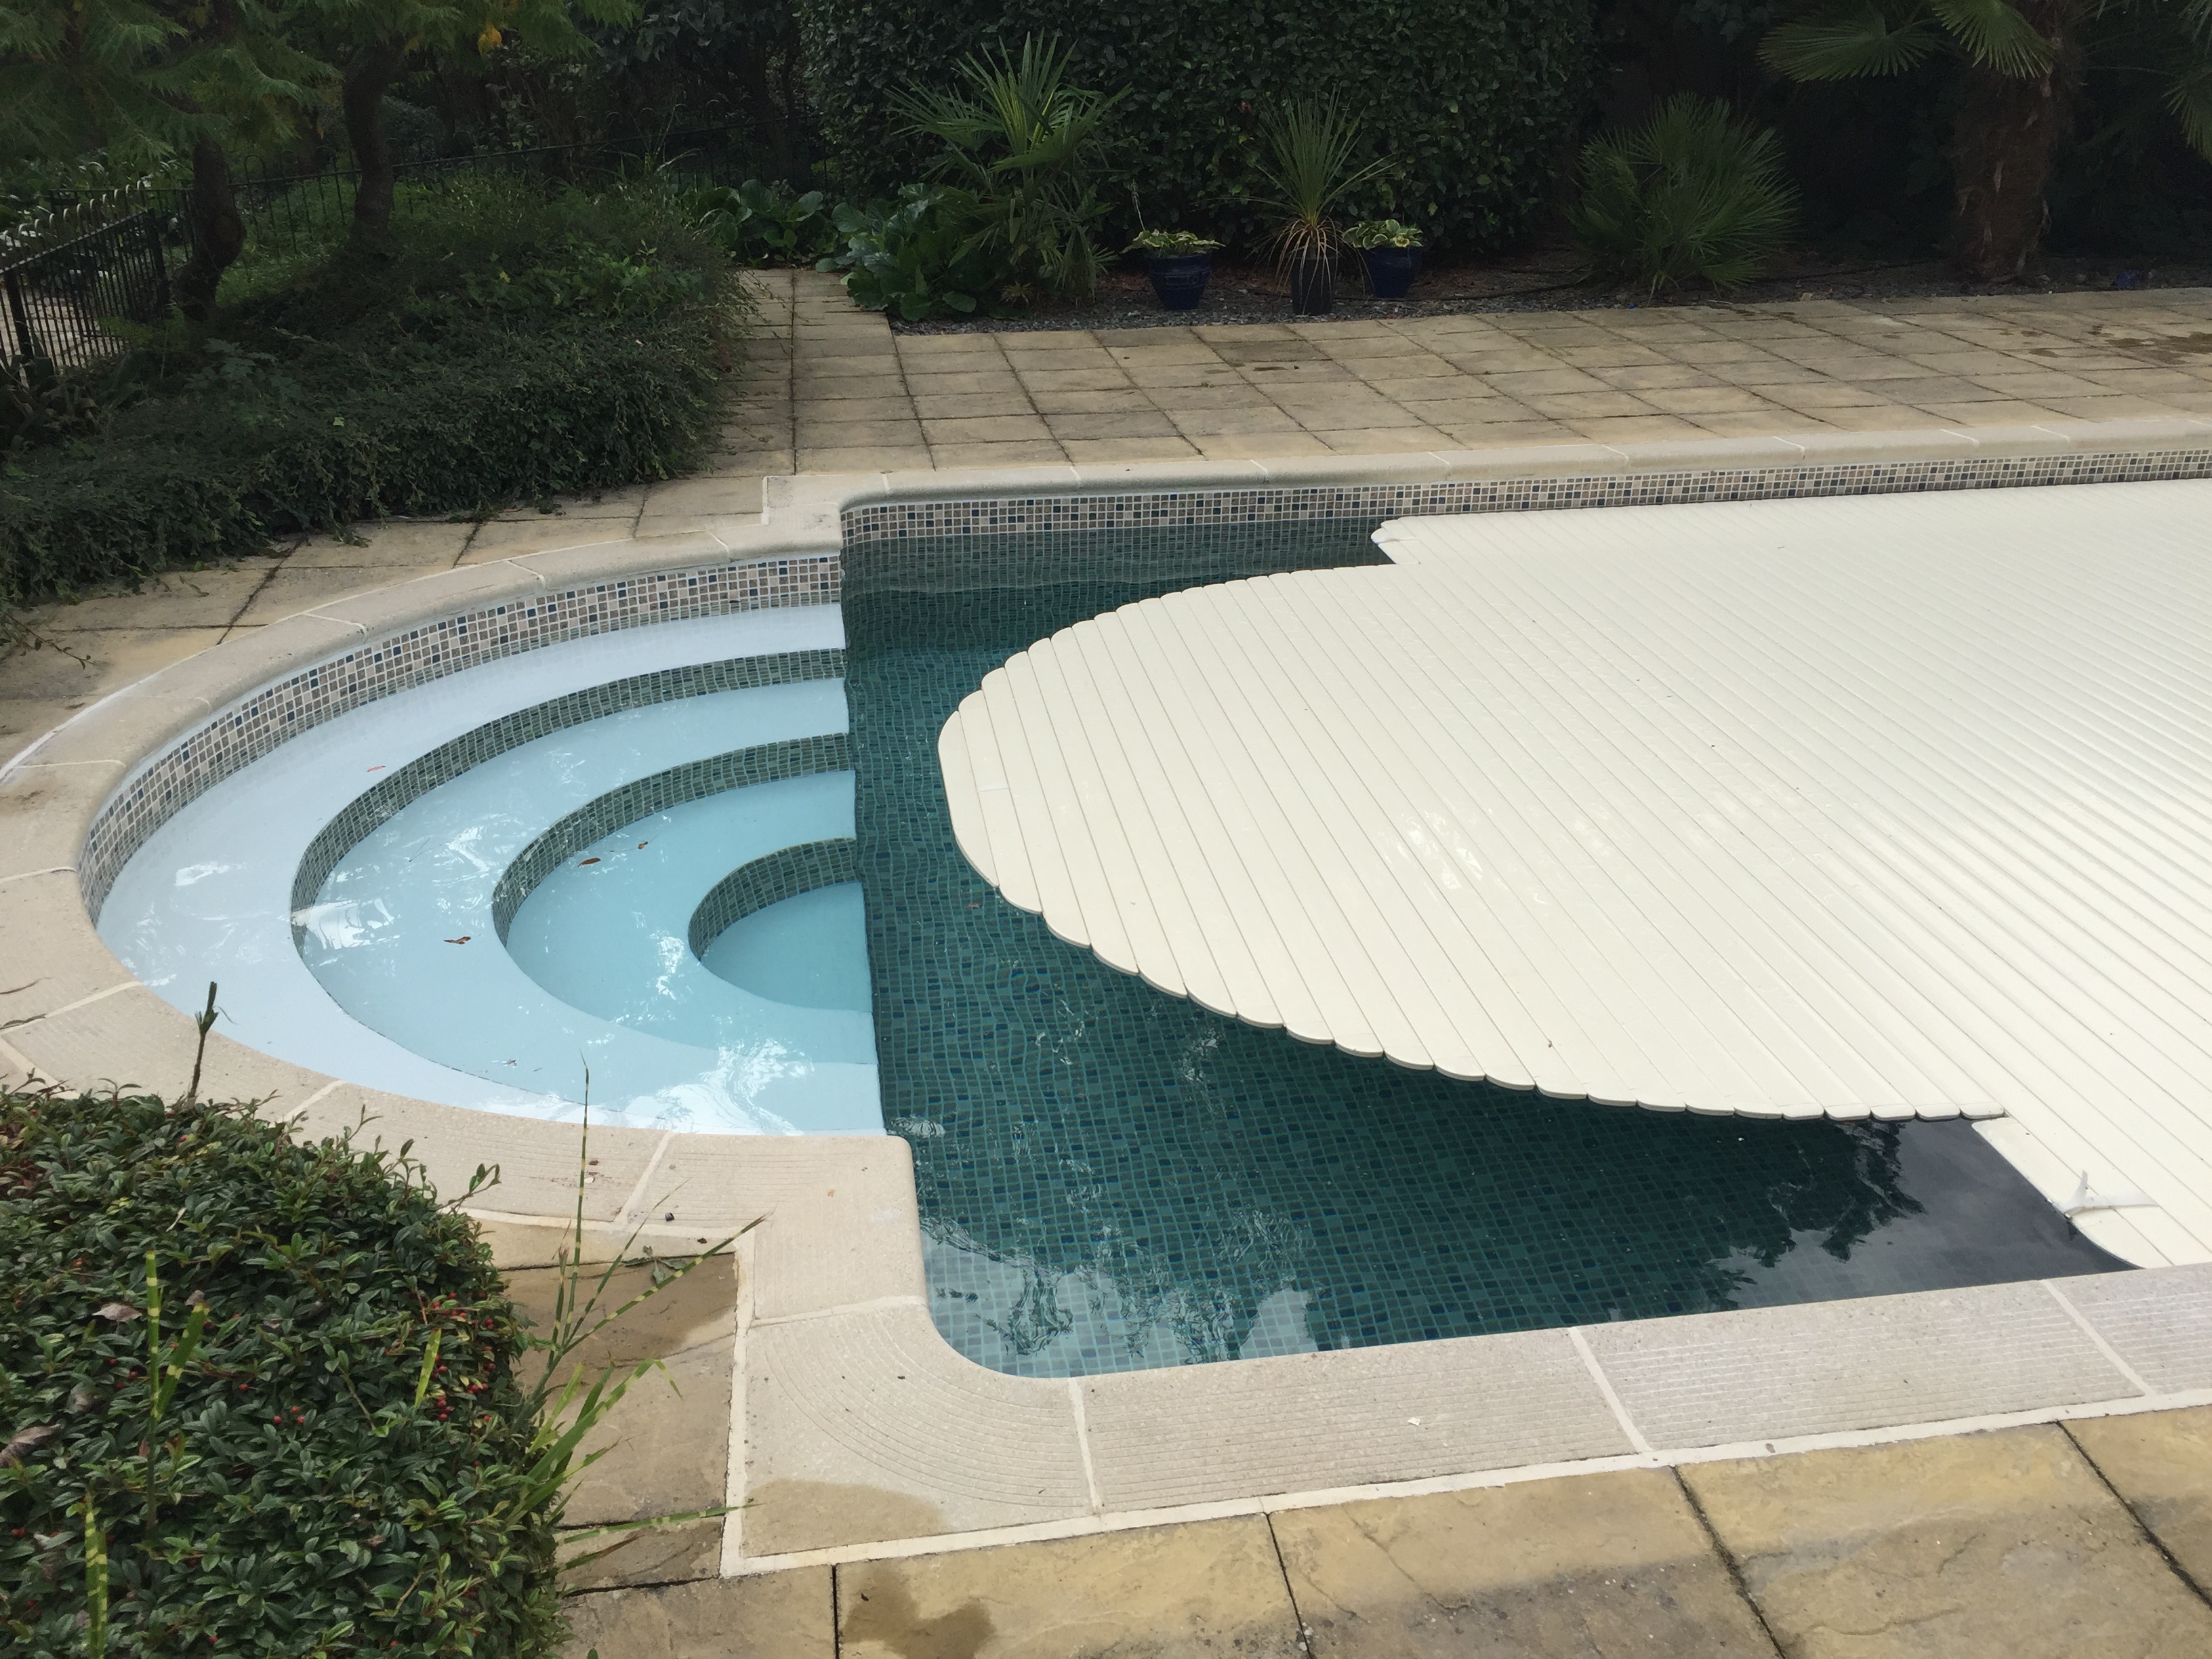 Slatted pool cover